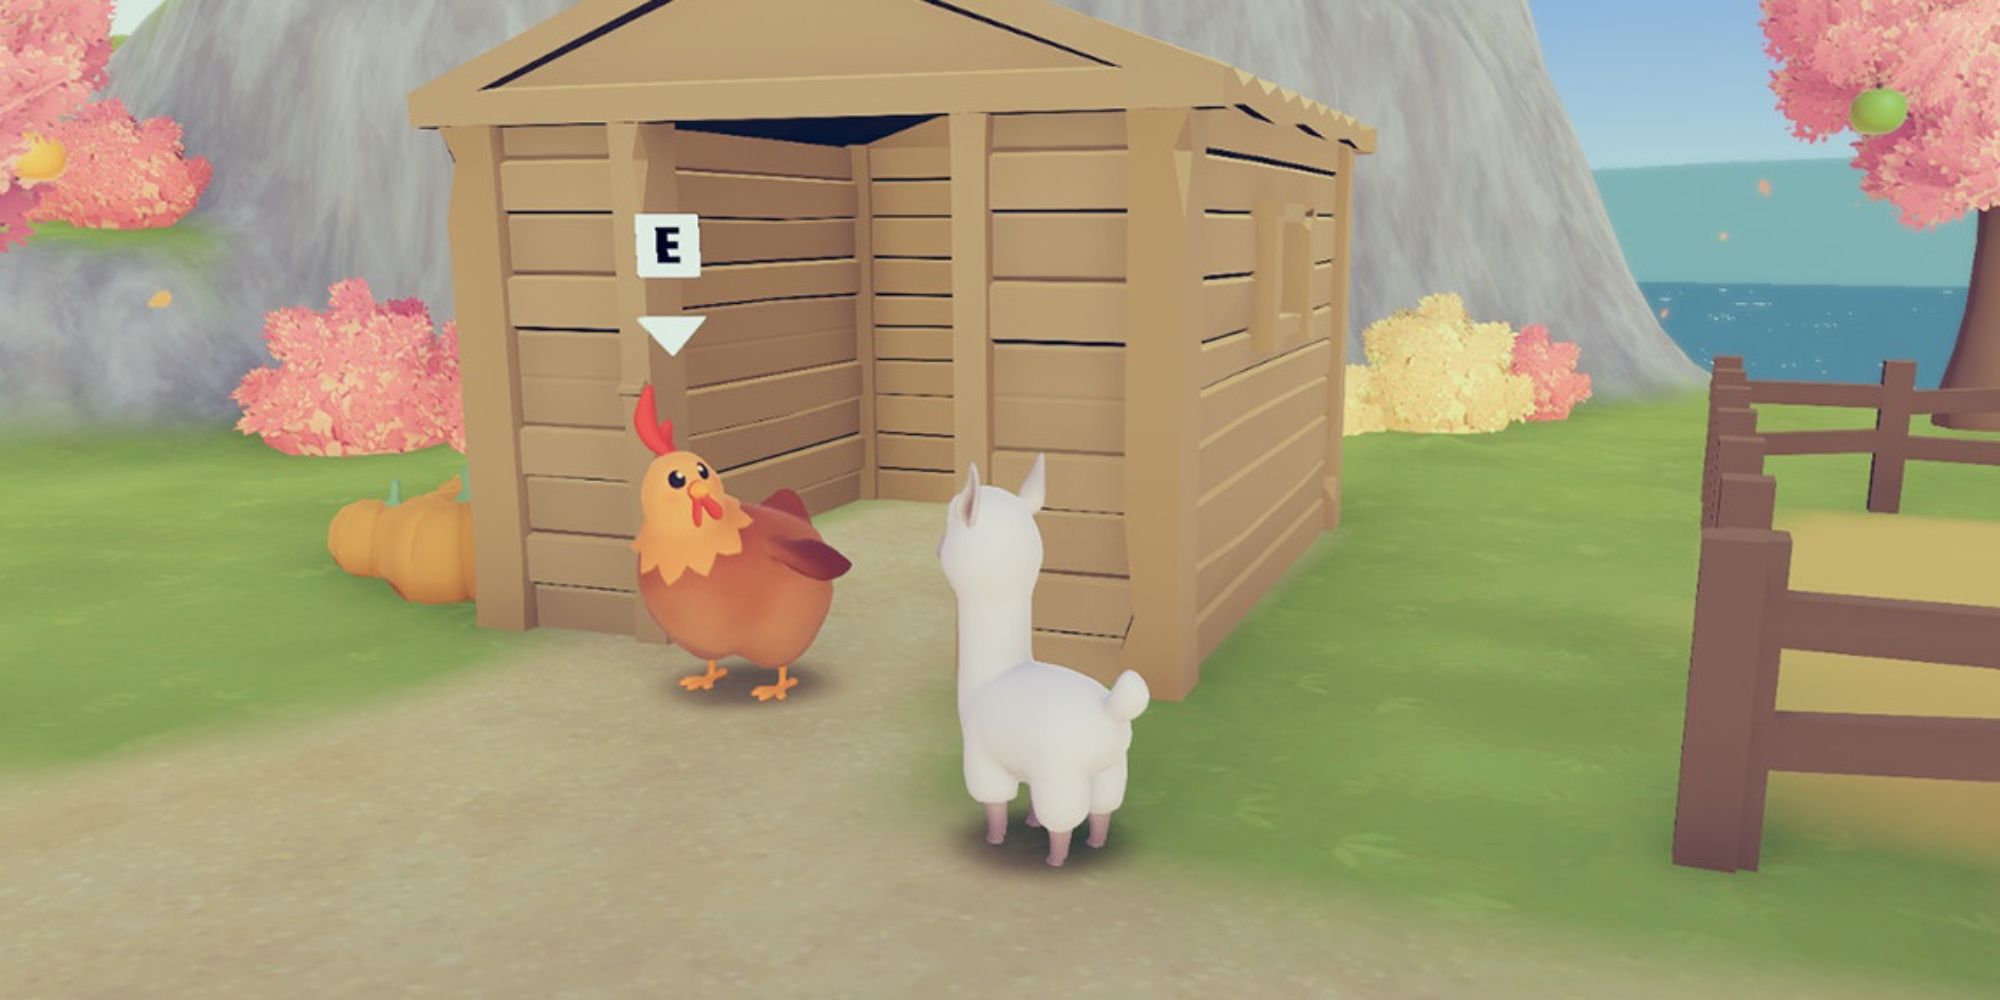 Player helps farm animals in the game